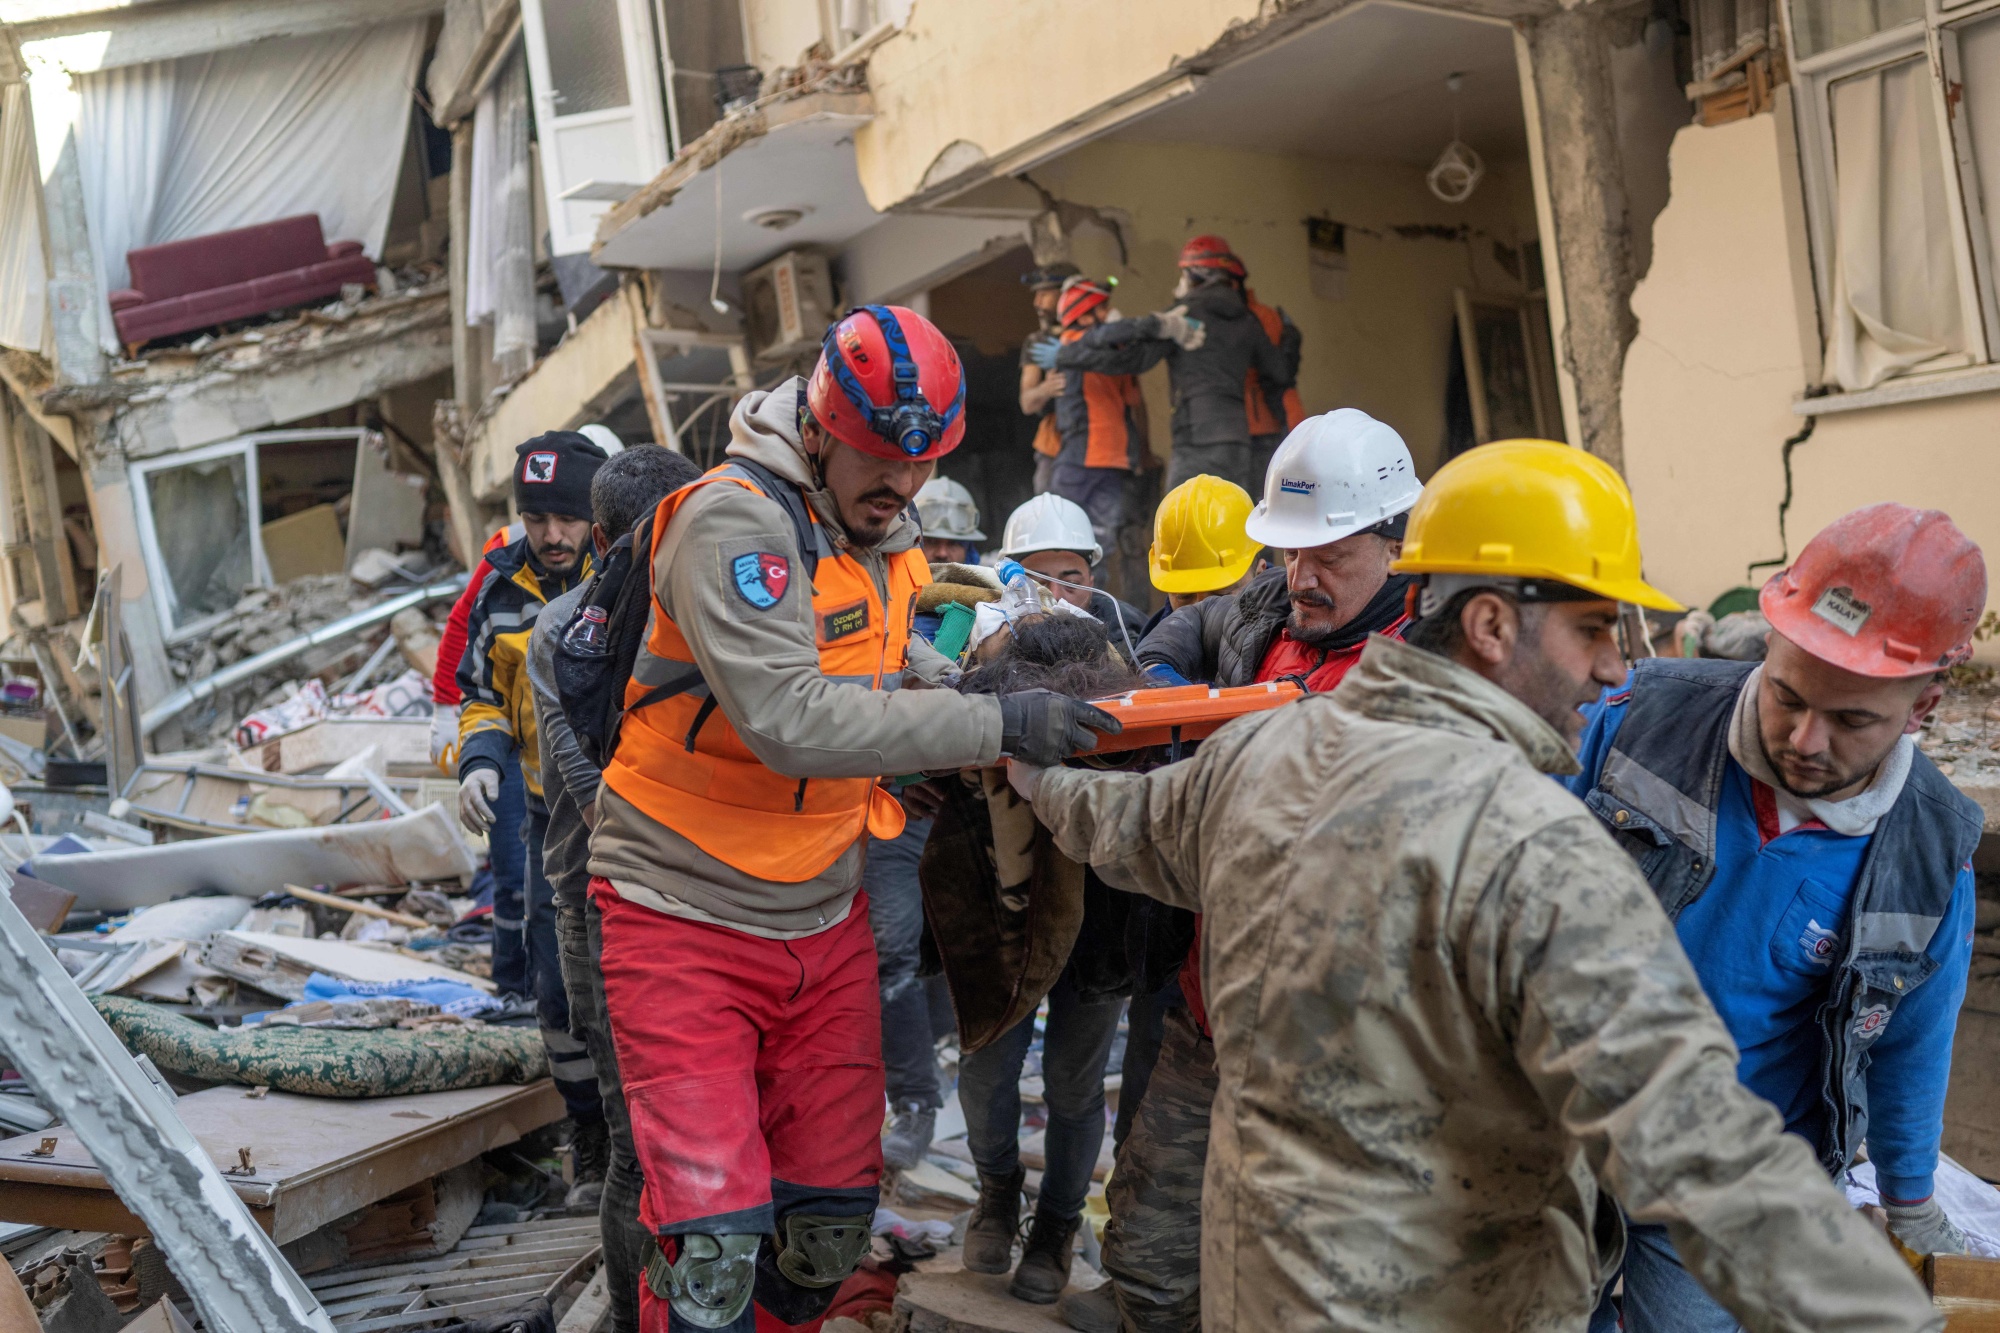 Rescuers transport a survivor from a collapsed building in Hatay, Turkey, on Feb. 9.